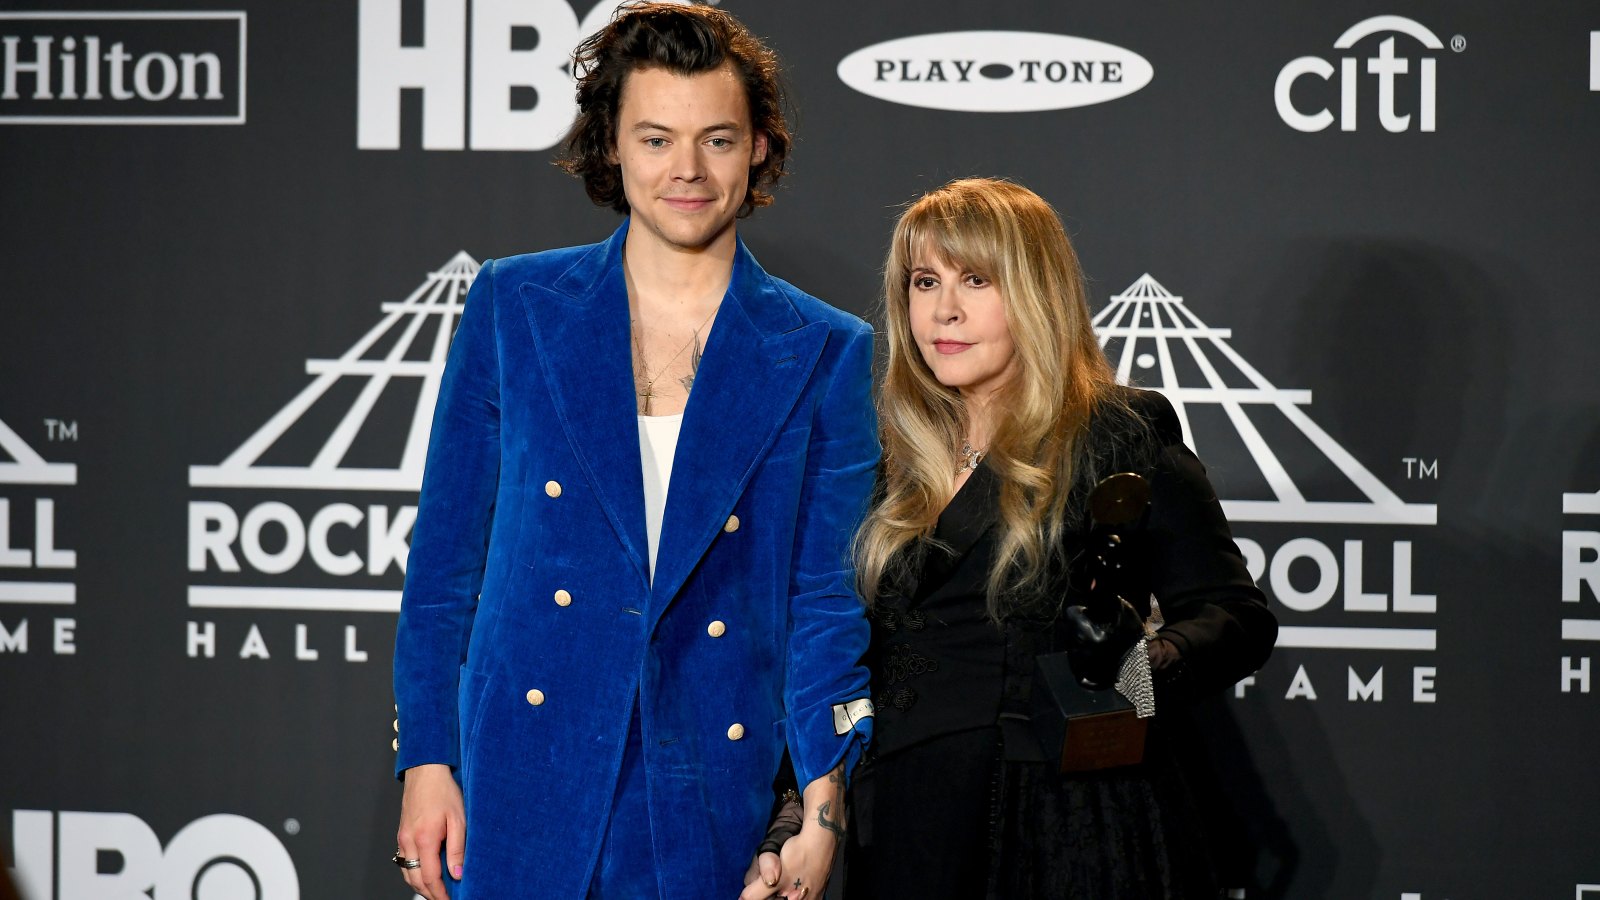 Stevie Nicks Mistakenly Thought Harry Styles Was in 'NSync